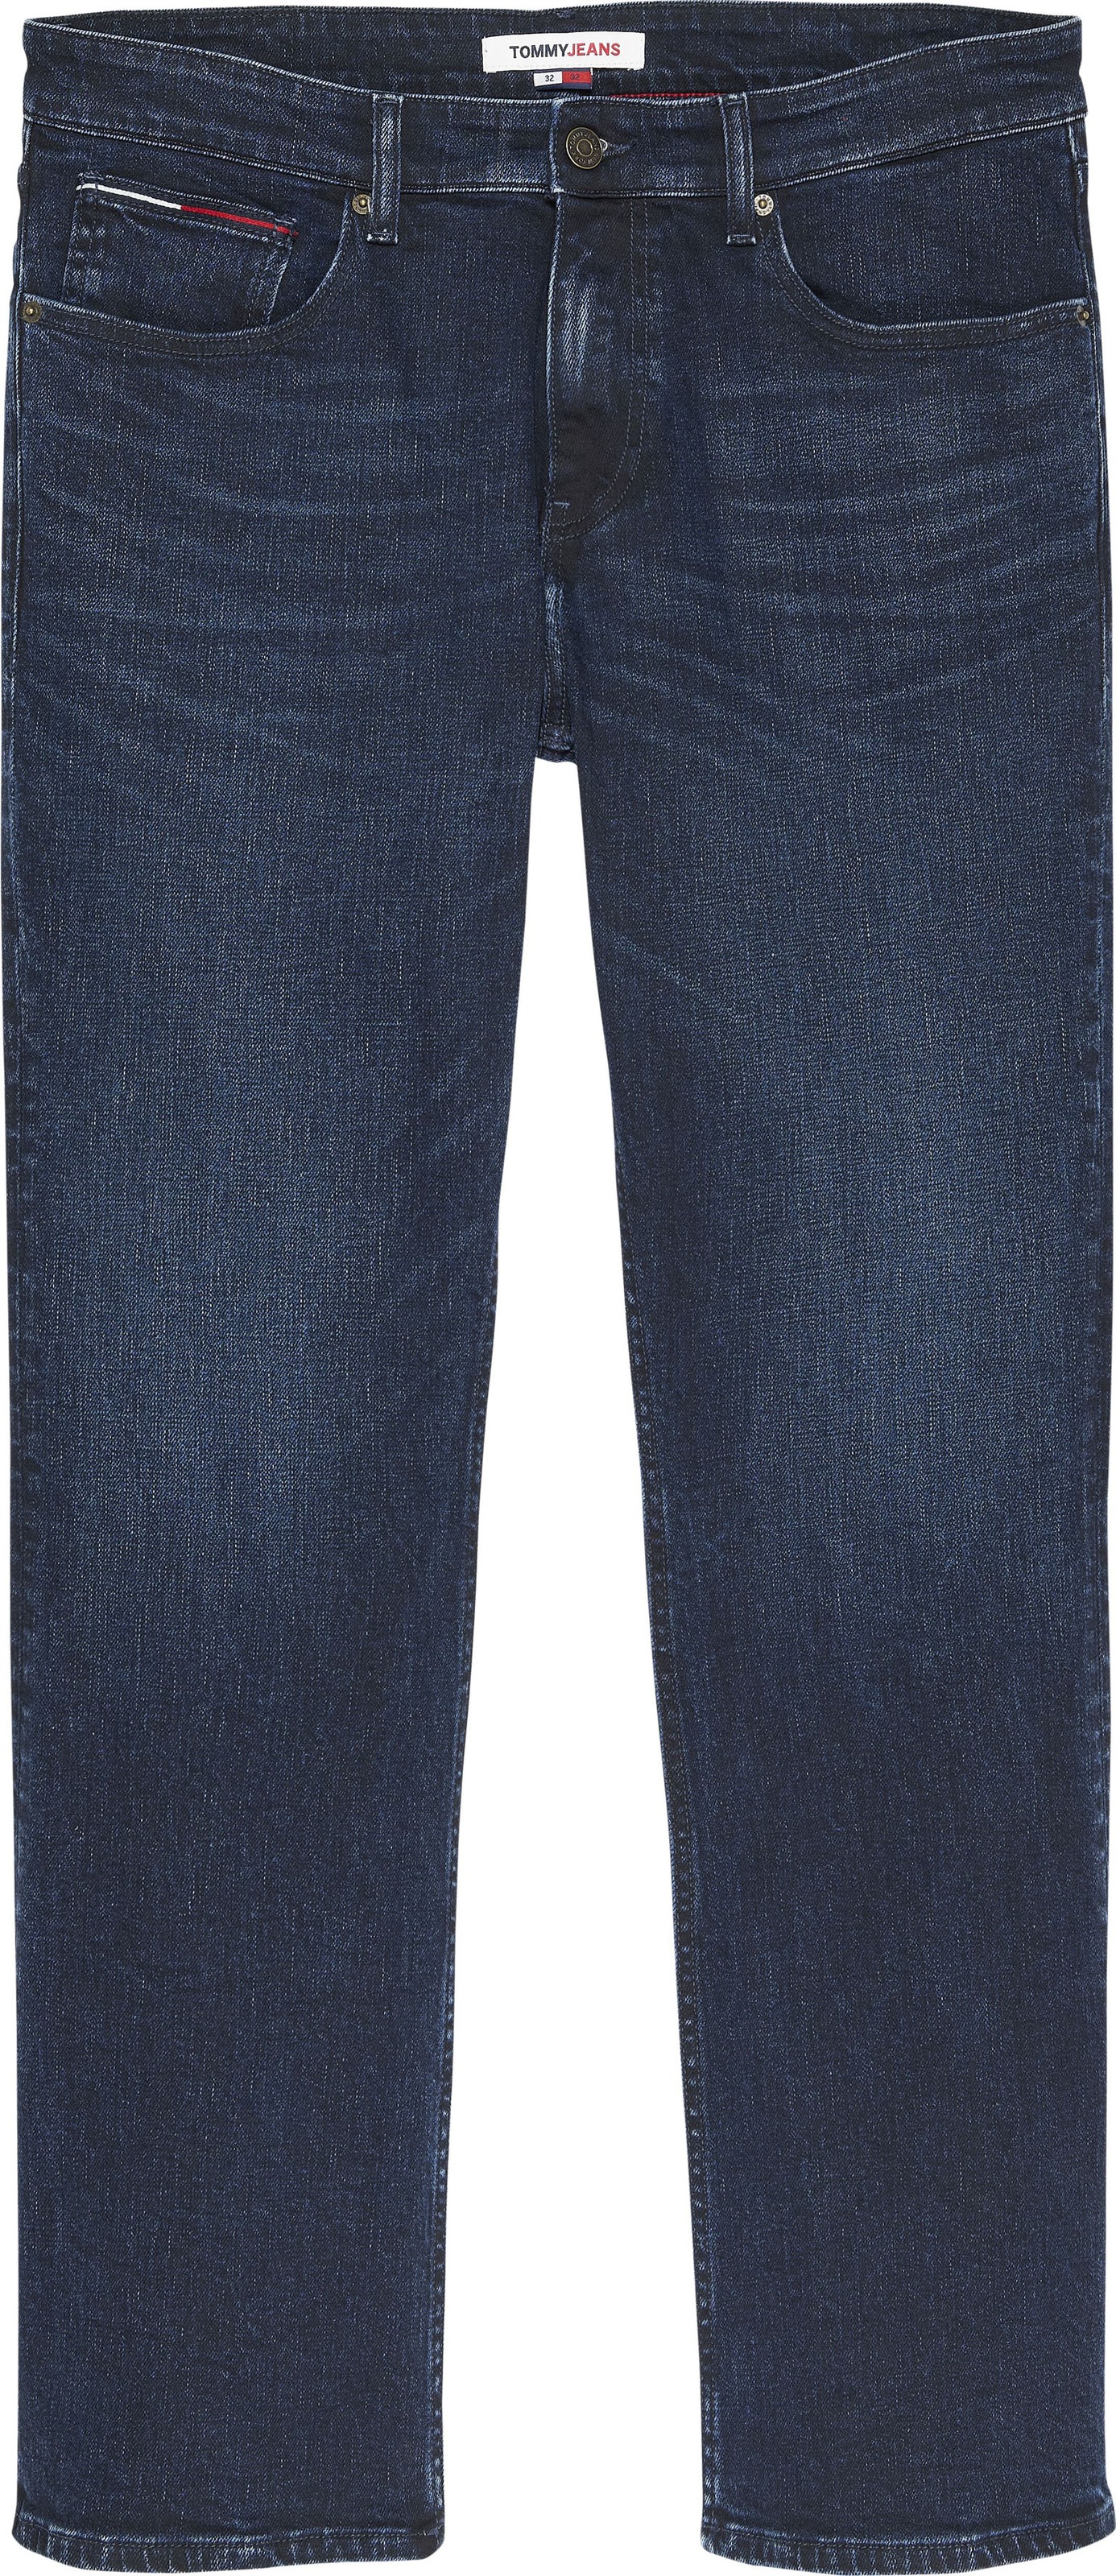 BOOTCUT OTTO Jeans kaufen bei Straight-Jeans Tommy online RGLR »RYAN BE«